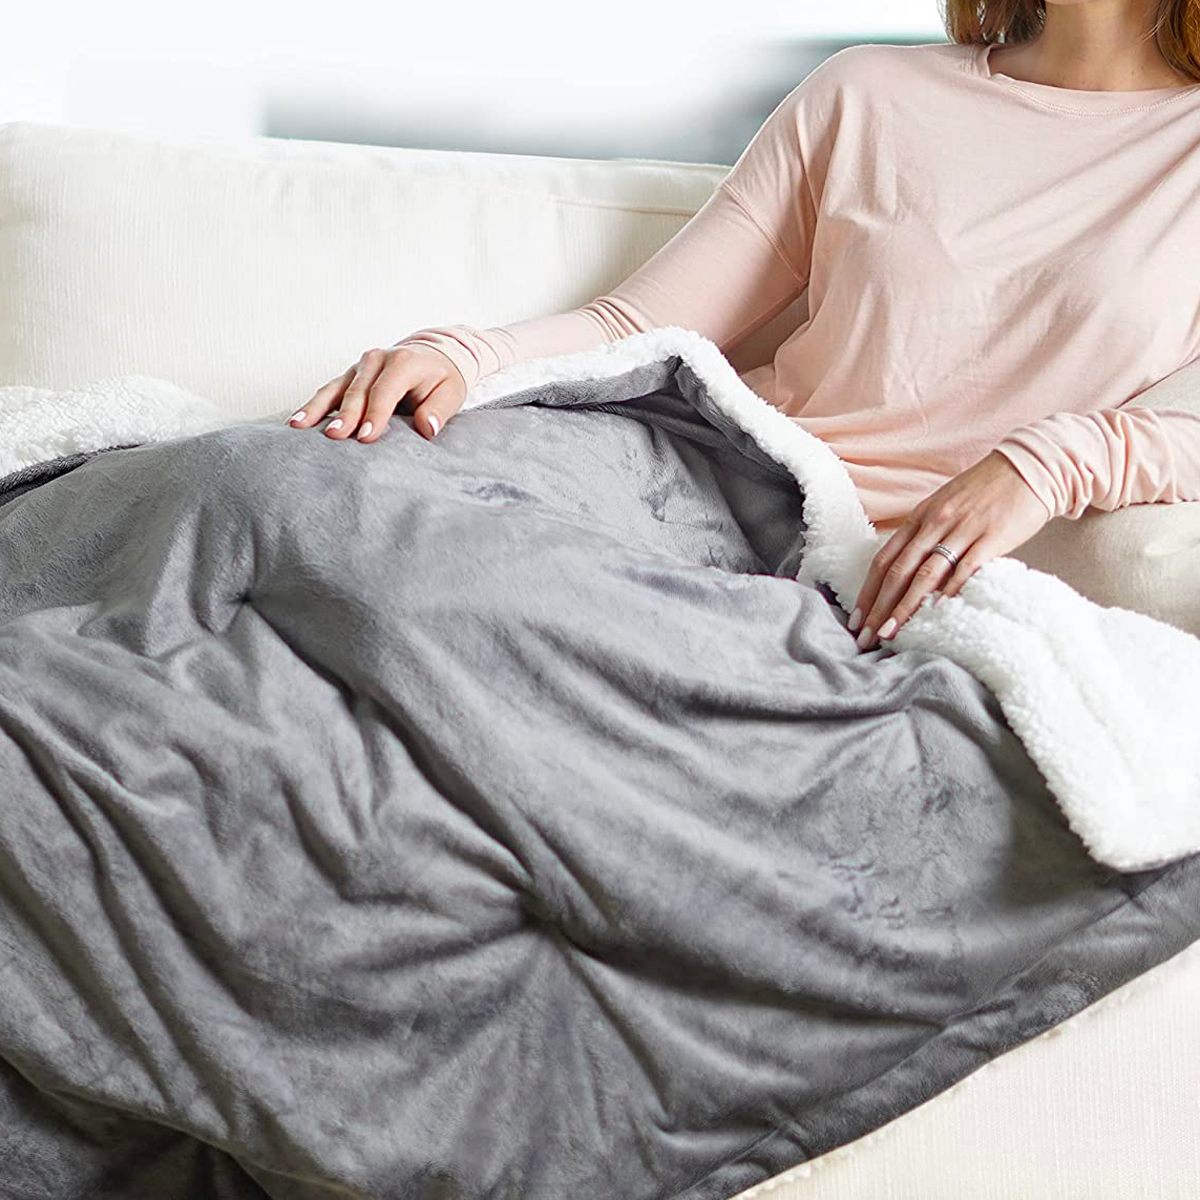 <p>College and high school grads are likely to be at least a little anxious about the future. Comfort them with this top-rated <a href="https://www.glamour.com/gallery/best-weighted-blankets?mbid=synd_msn_rss&utm_source=msn&utm_medium=syndication">weighted blanket</a> that mimics the feeling of a warm embrace with a heating feature.</p> <p><em>Save when you shop for the best graduation gift ideas with these <a href="https://www.glamour.com/coupons/amazon?mbid=synd_msn_rss&utm_source=msn&utm_medium=syndication">Amazon promo code promo codes</a>.</em></p> $120, Amazon. <a href="https://www.amazon.com/Pure-Enrichment-WeightedWarmth-Non-Toxic-Micromink/dp/B0842YDG5M/">Get it now!</a><p>Sign up for today’s biggest stories, from pop culture to politics.</p><a href="https://www.glamour.com/newsletter/news?sourceCode=msnsend">Sign Up</a>